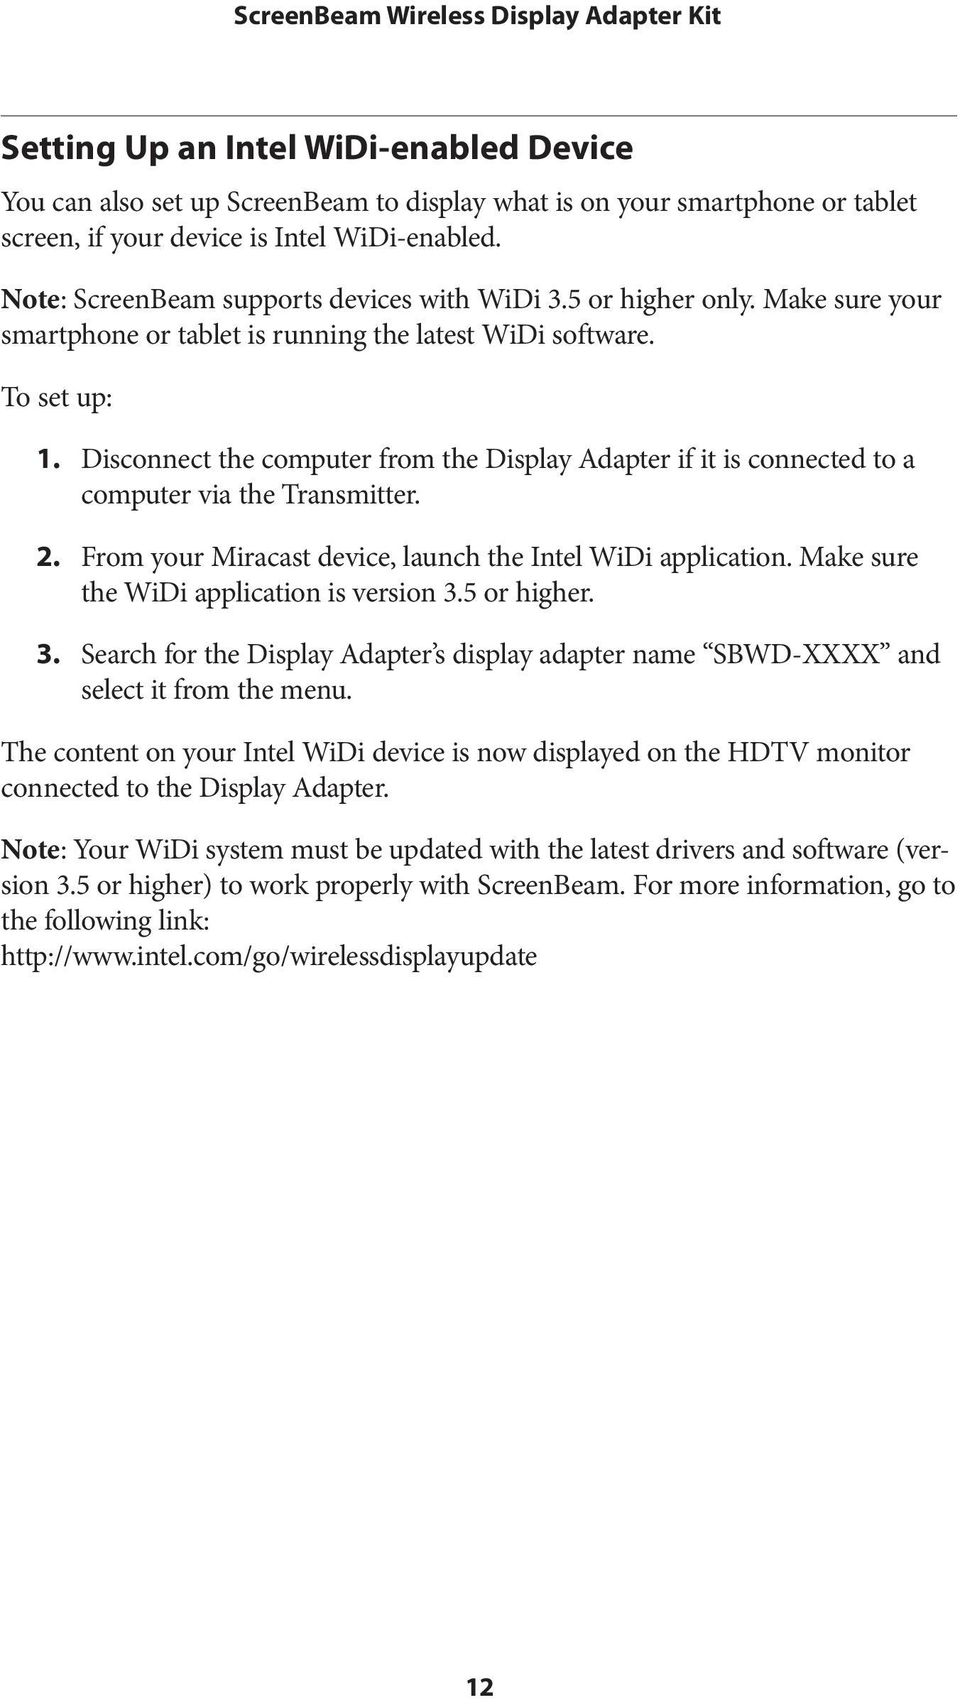 Disconnect the computer from the Display Adapter if it is connected to a computer via the Transmitter. 2. From your Miracast device, launch the Intel WiDi application.